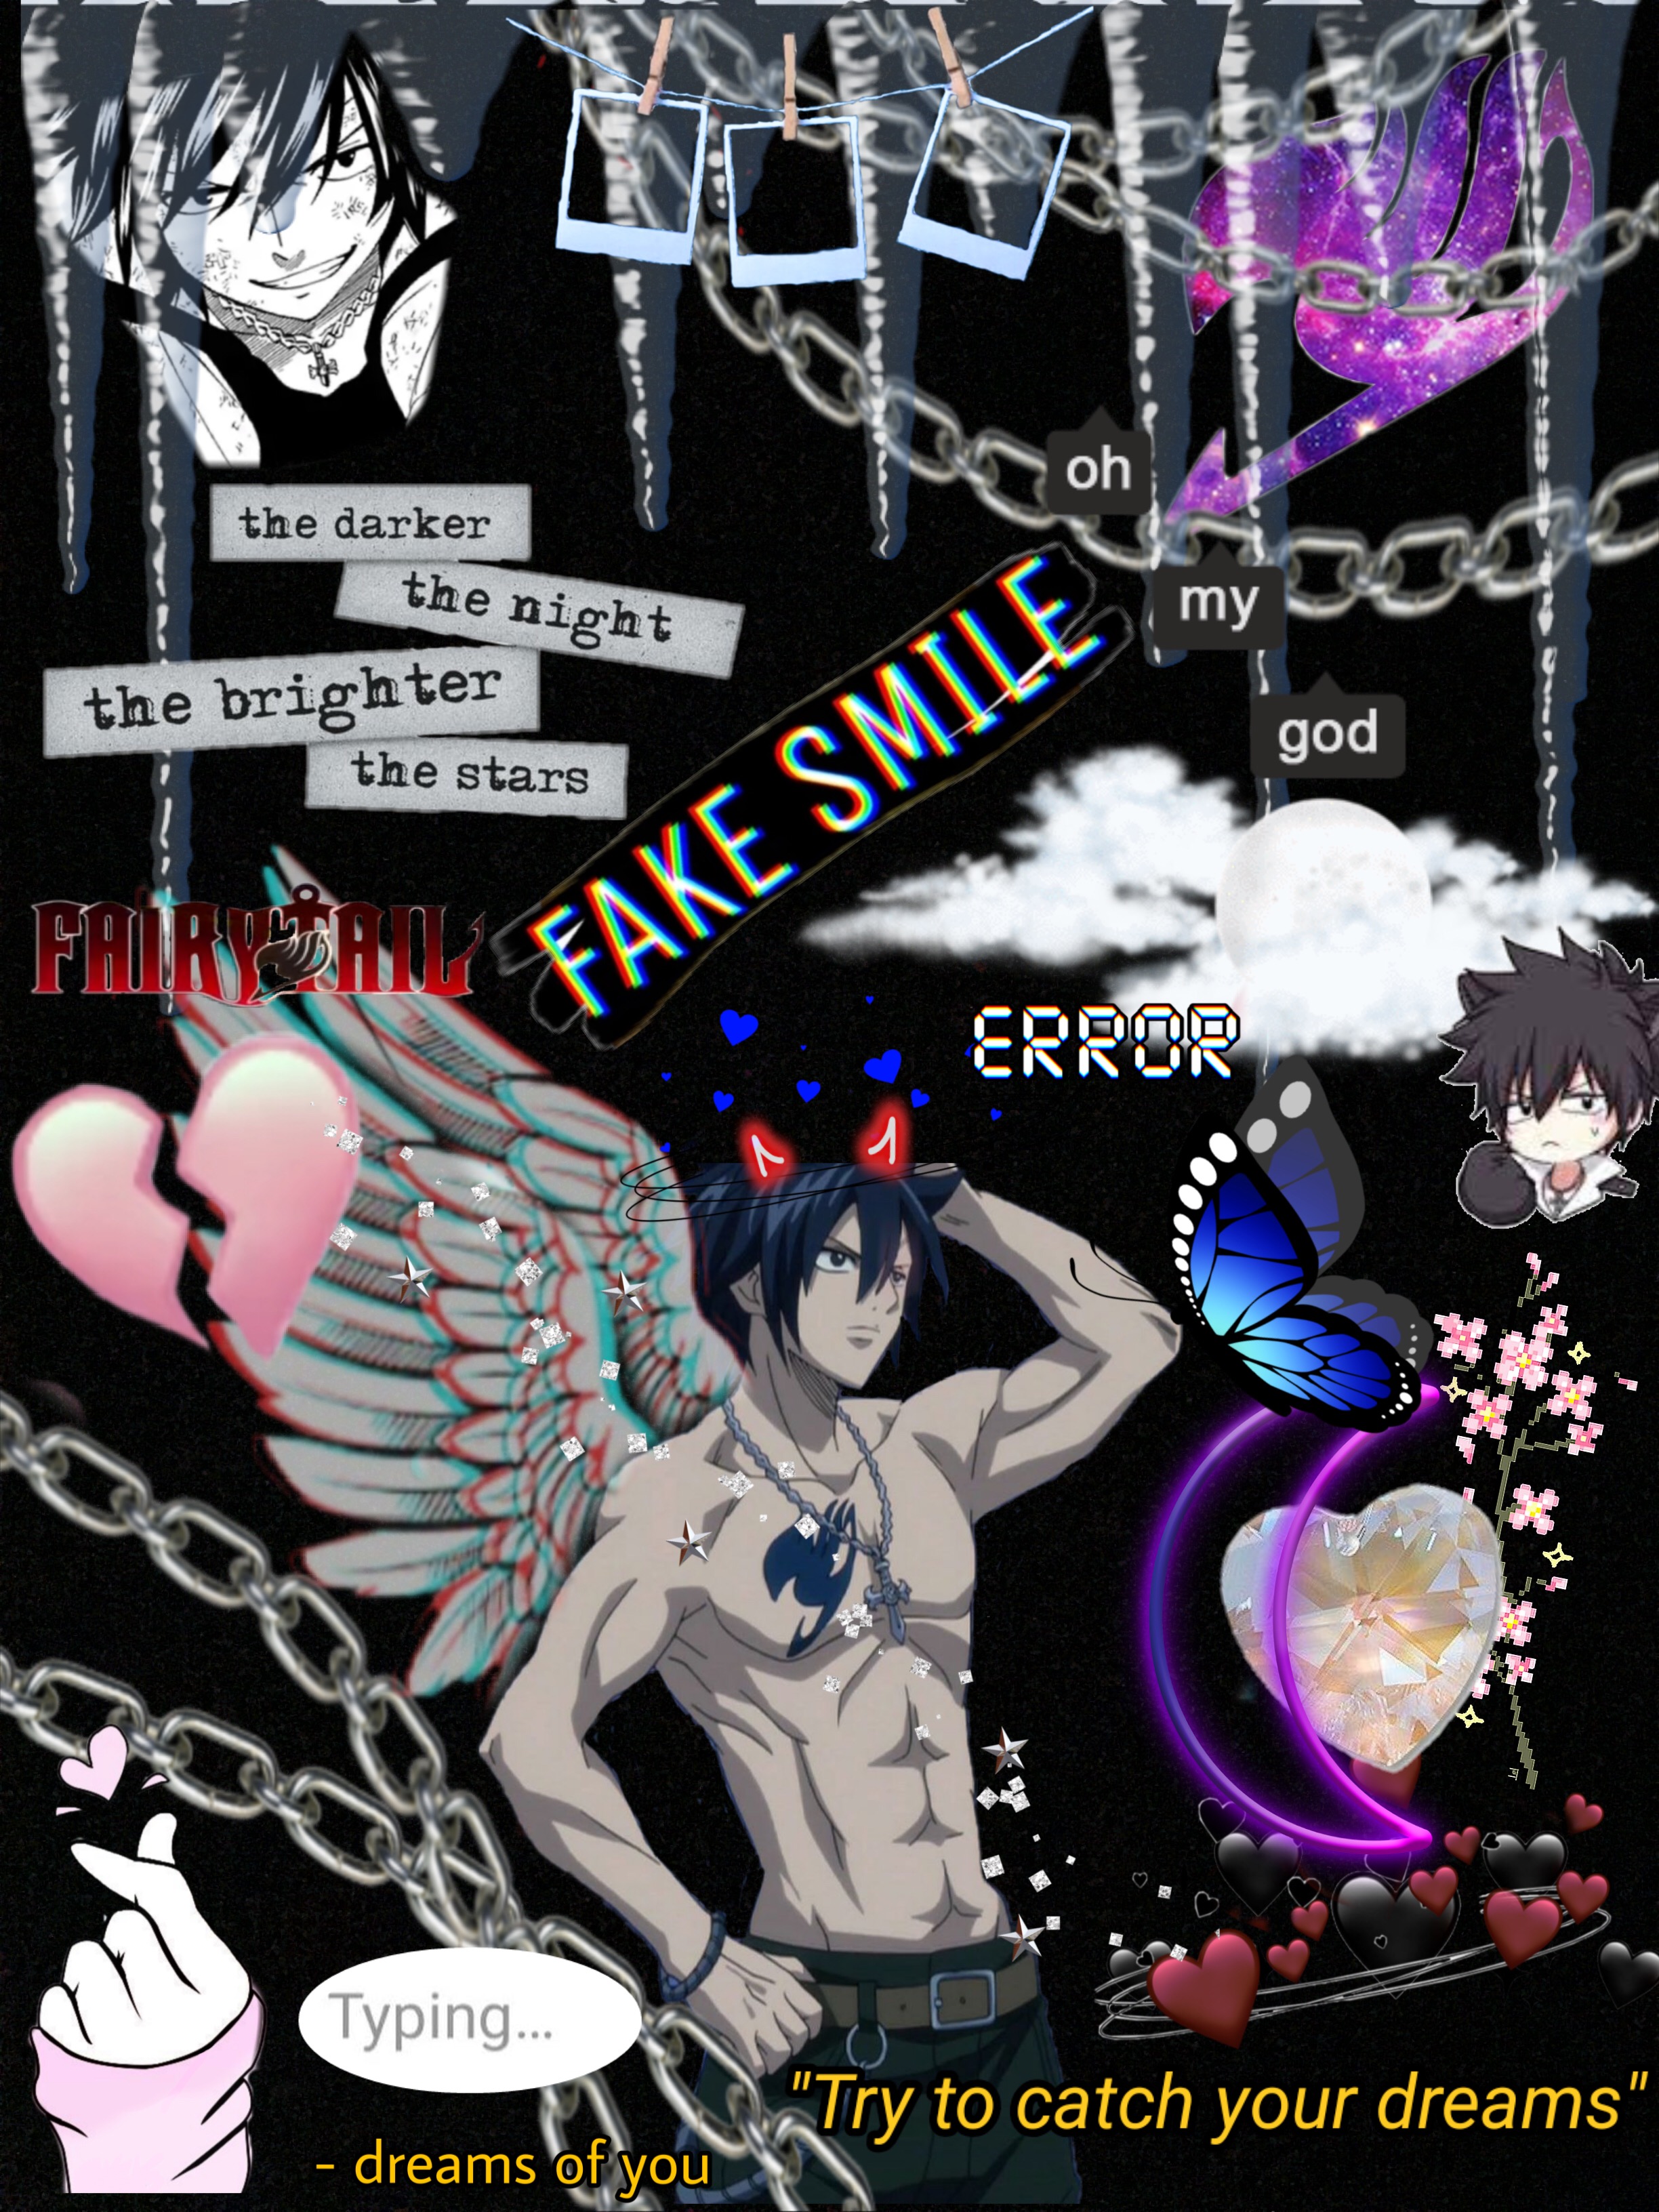 Featured image of post Gray Fullbuster Aesthetic 6 037 likes 628 talking about this